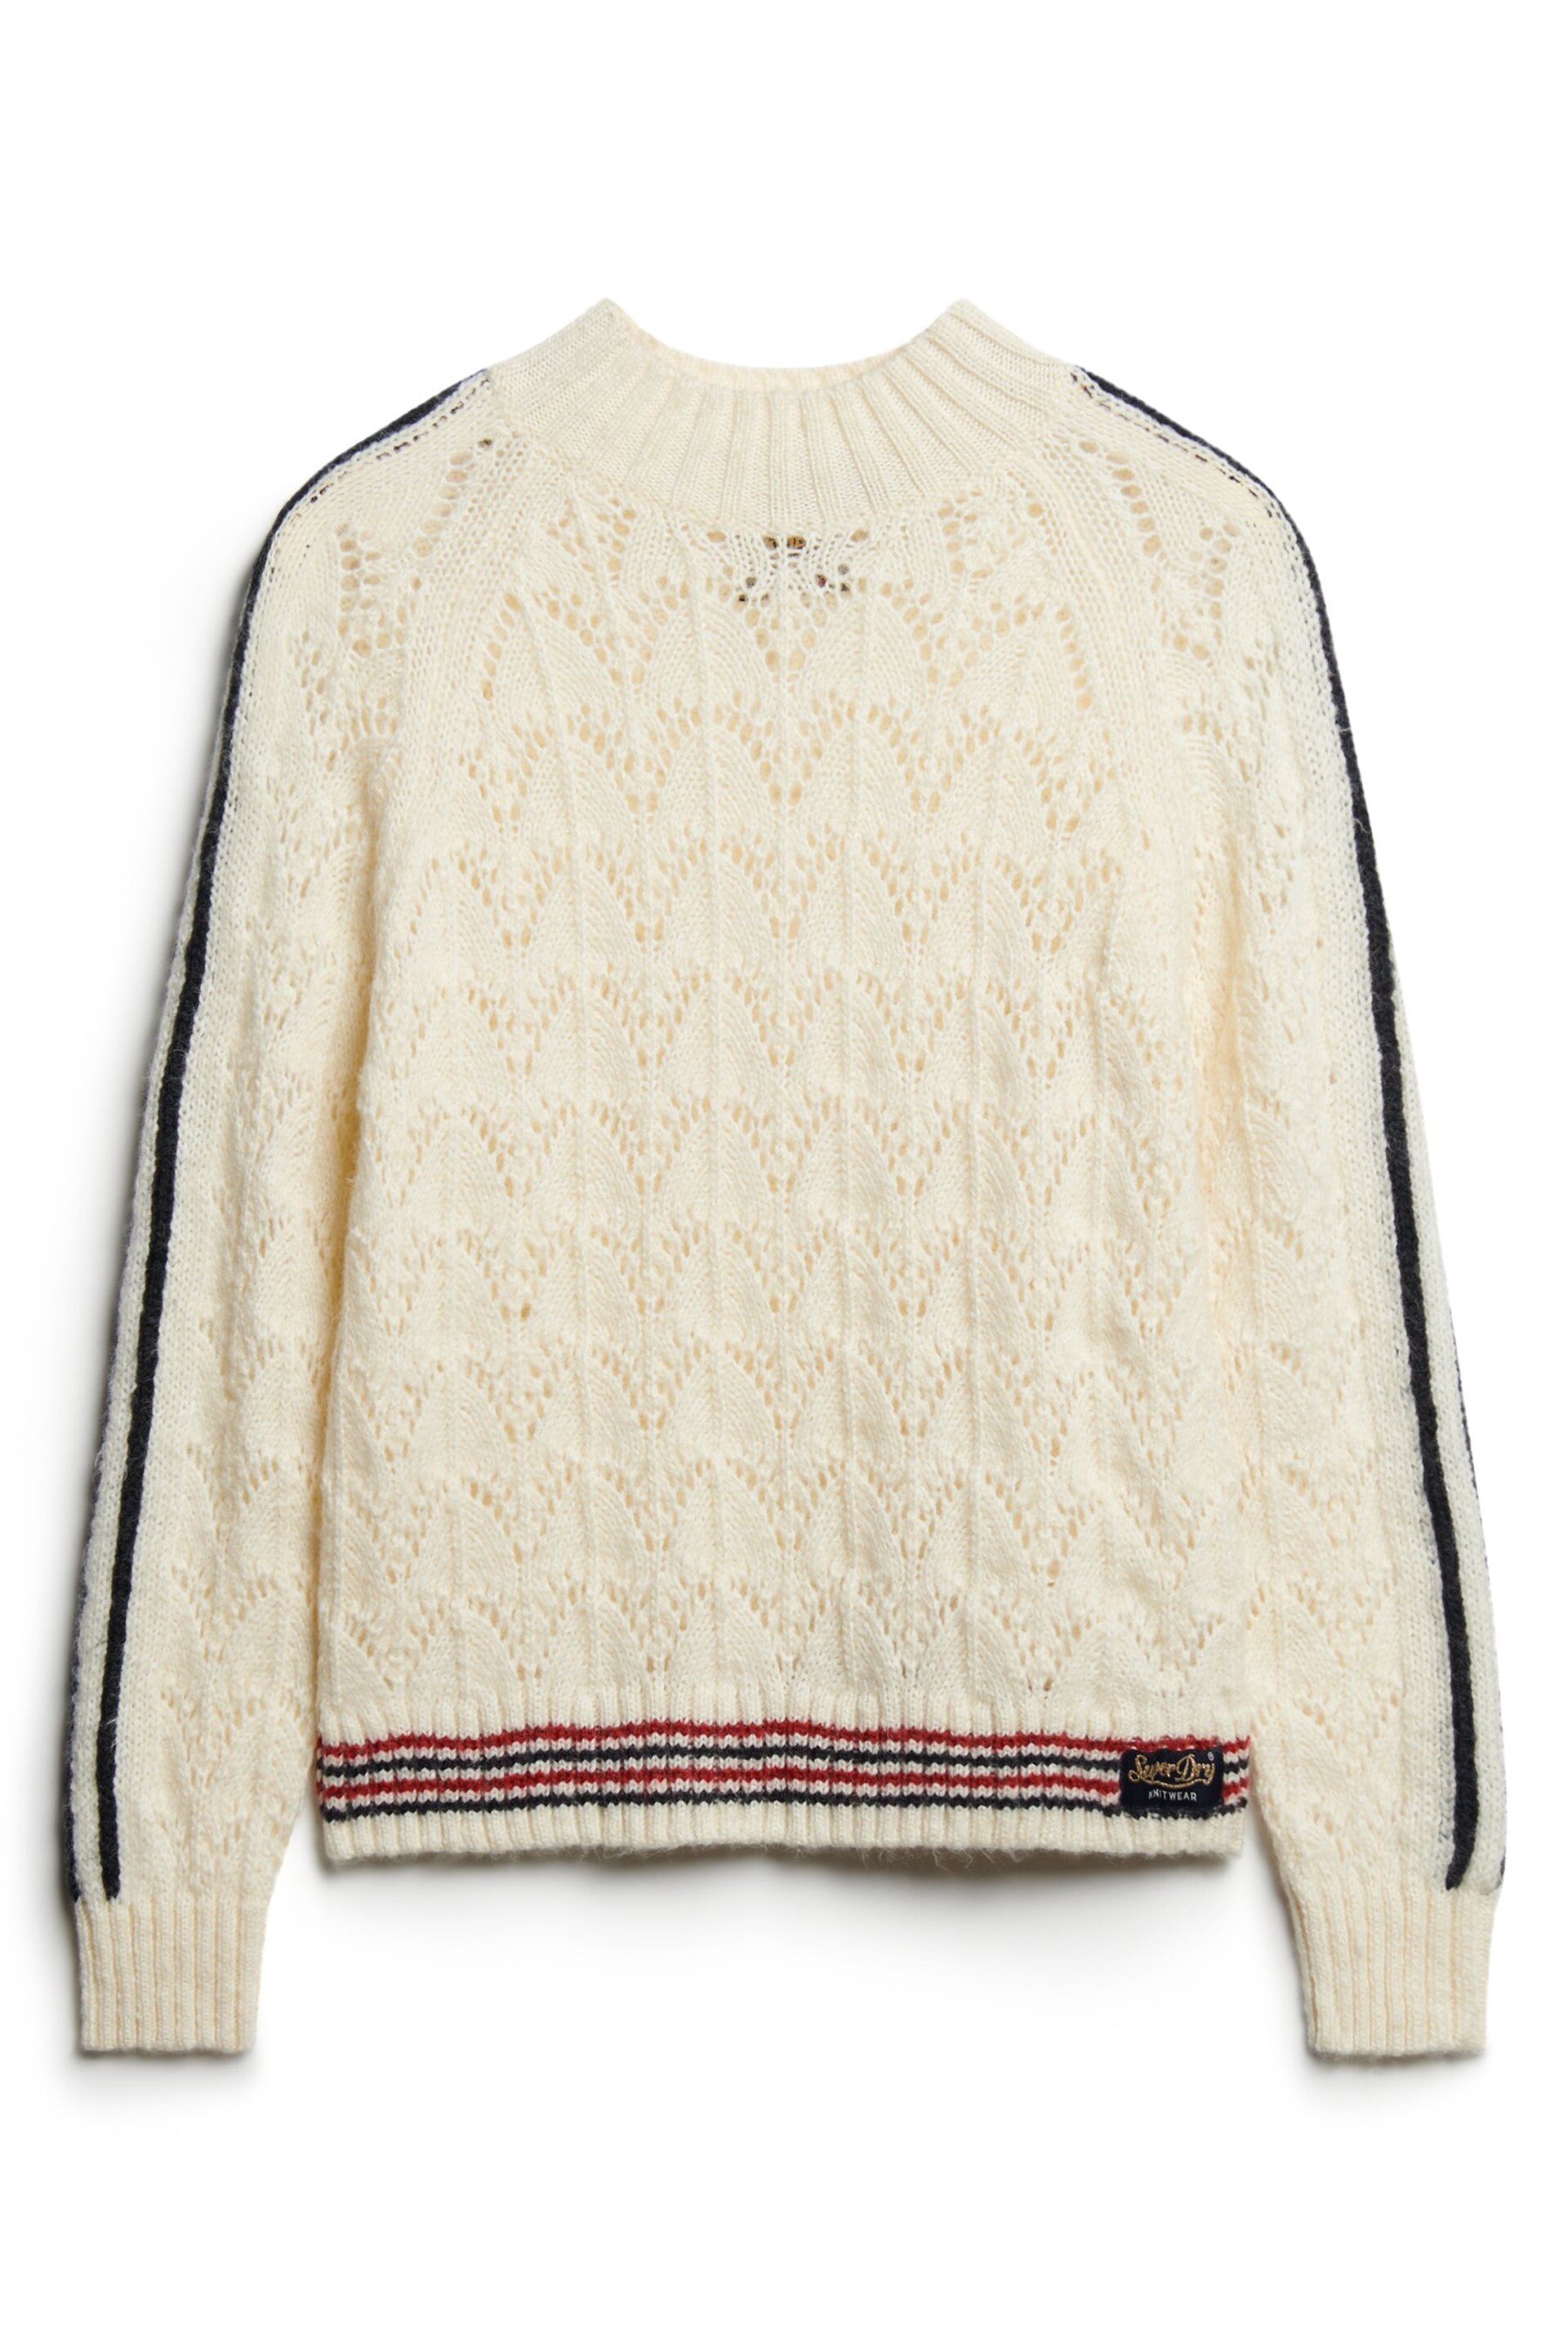 Superdry Cream Pointelle Knit Jumper - Image 4 of 5